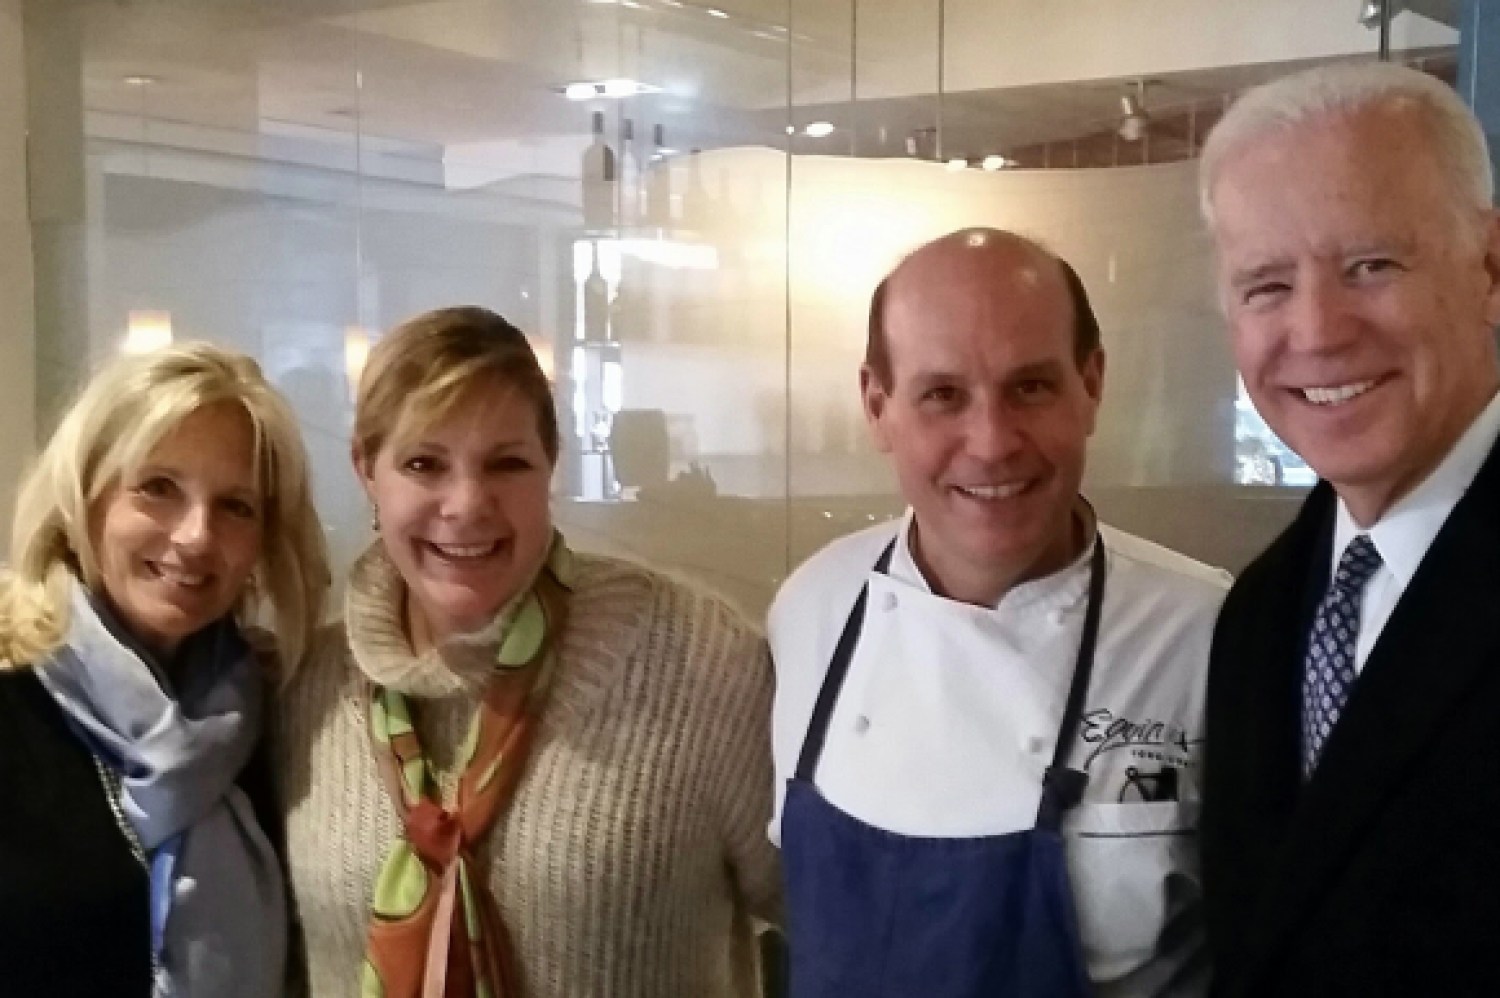 The Biden's with Todd and Ellen Kassoff, the owners of Equinox.